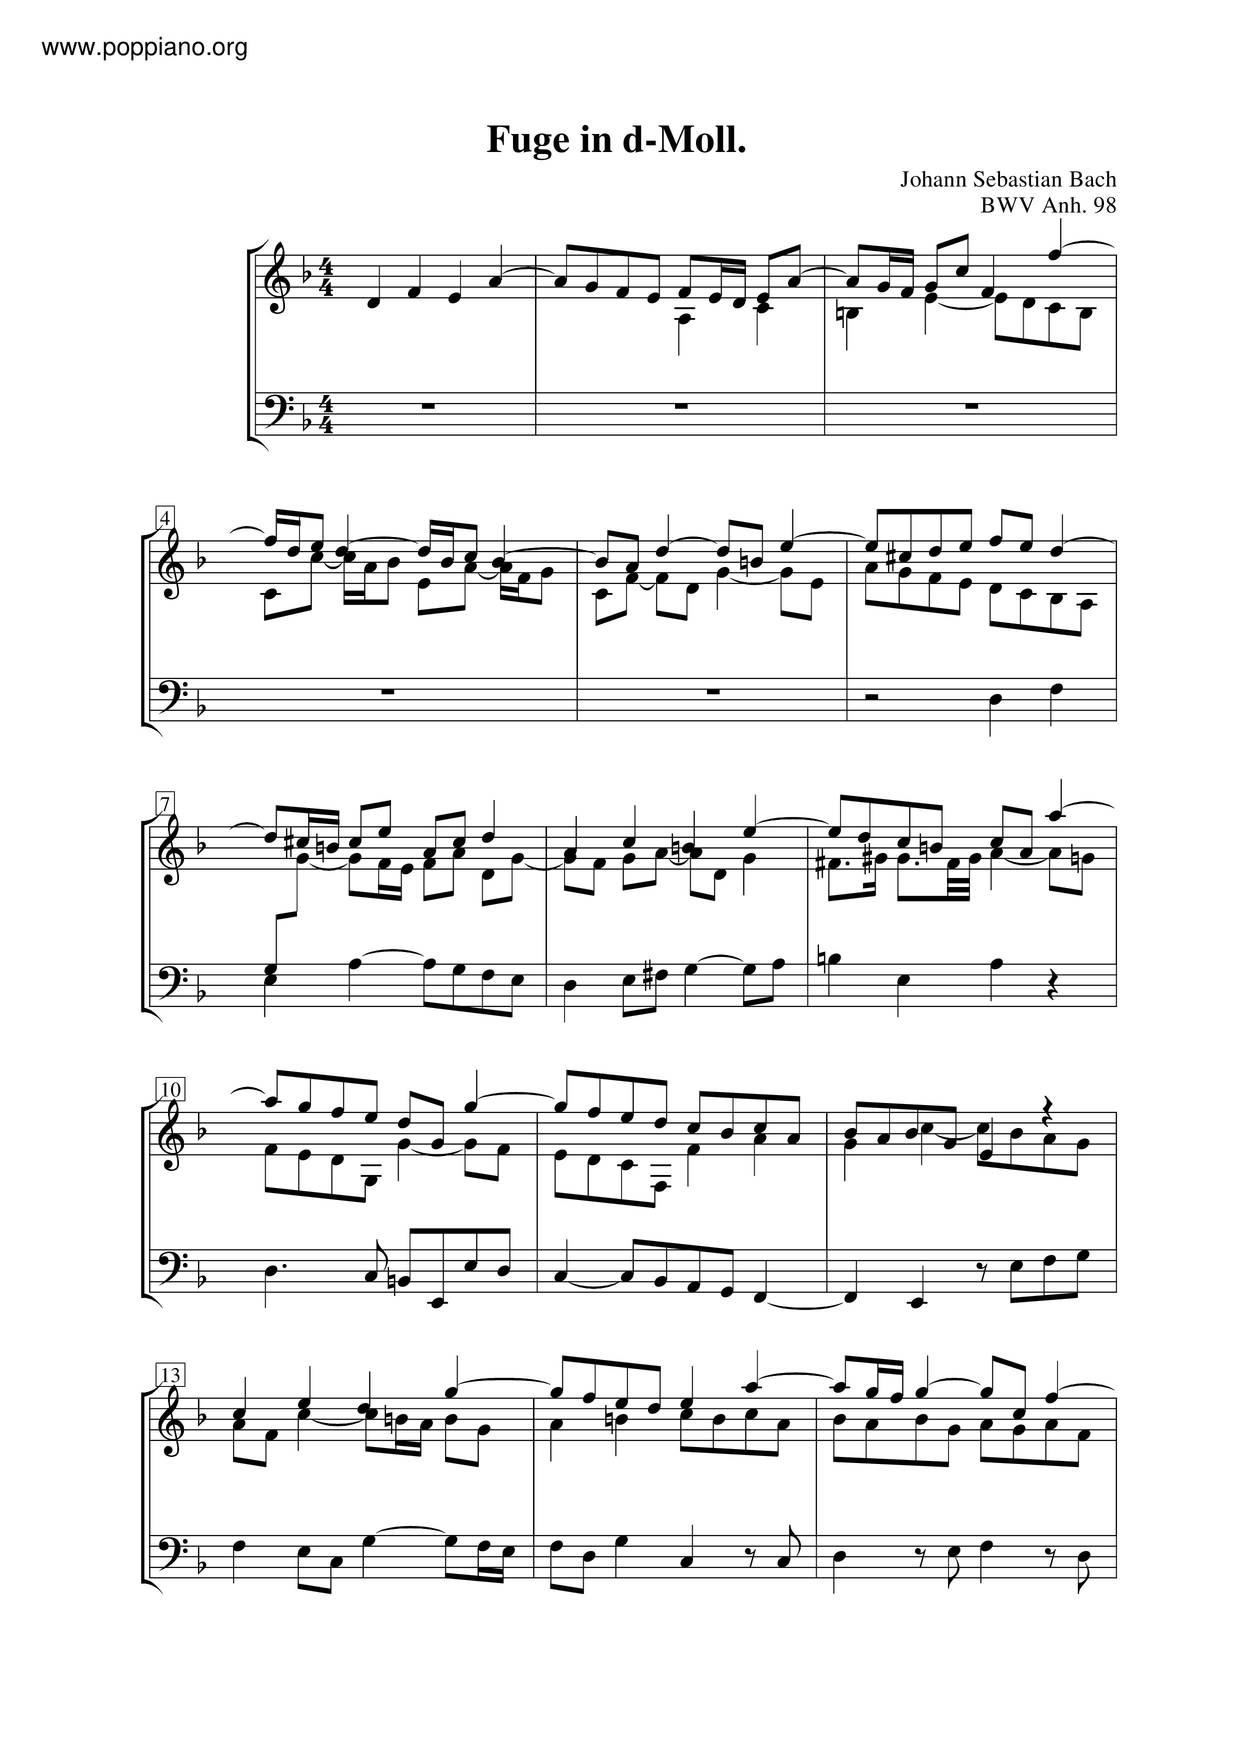 Fugue In D Minor, BWV Anh. 98 Score